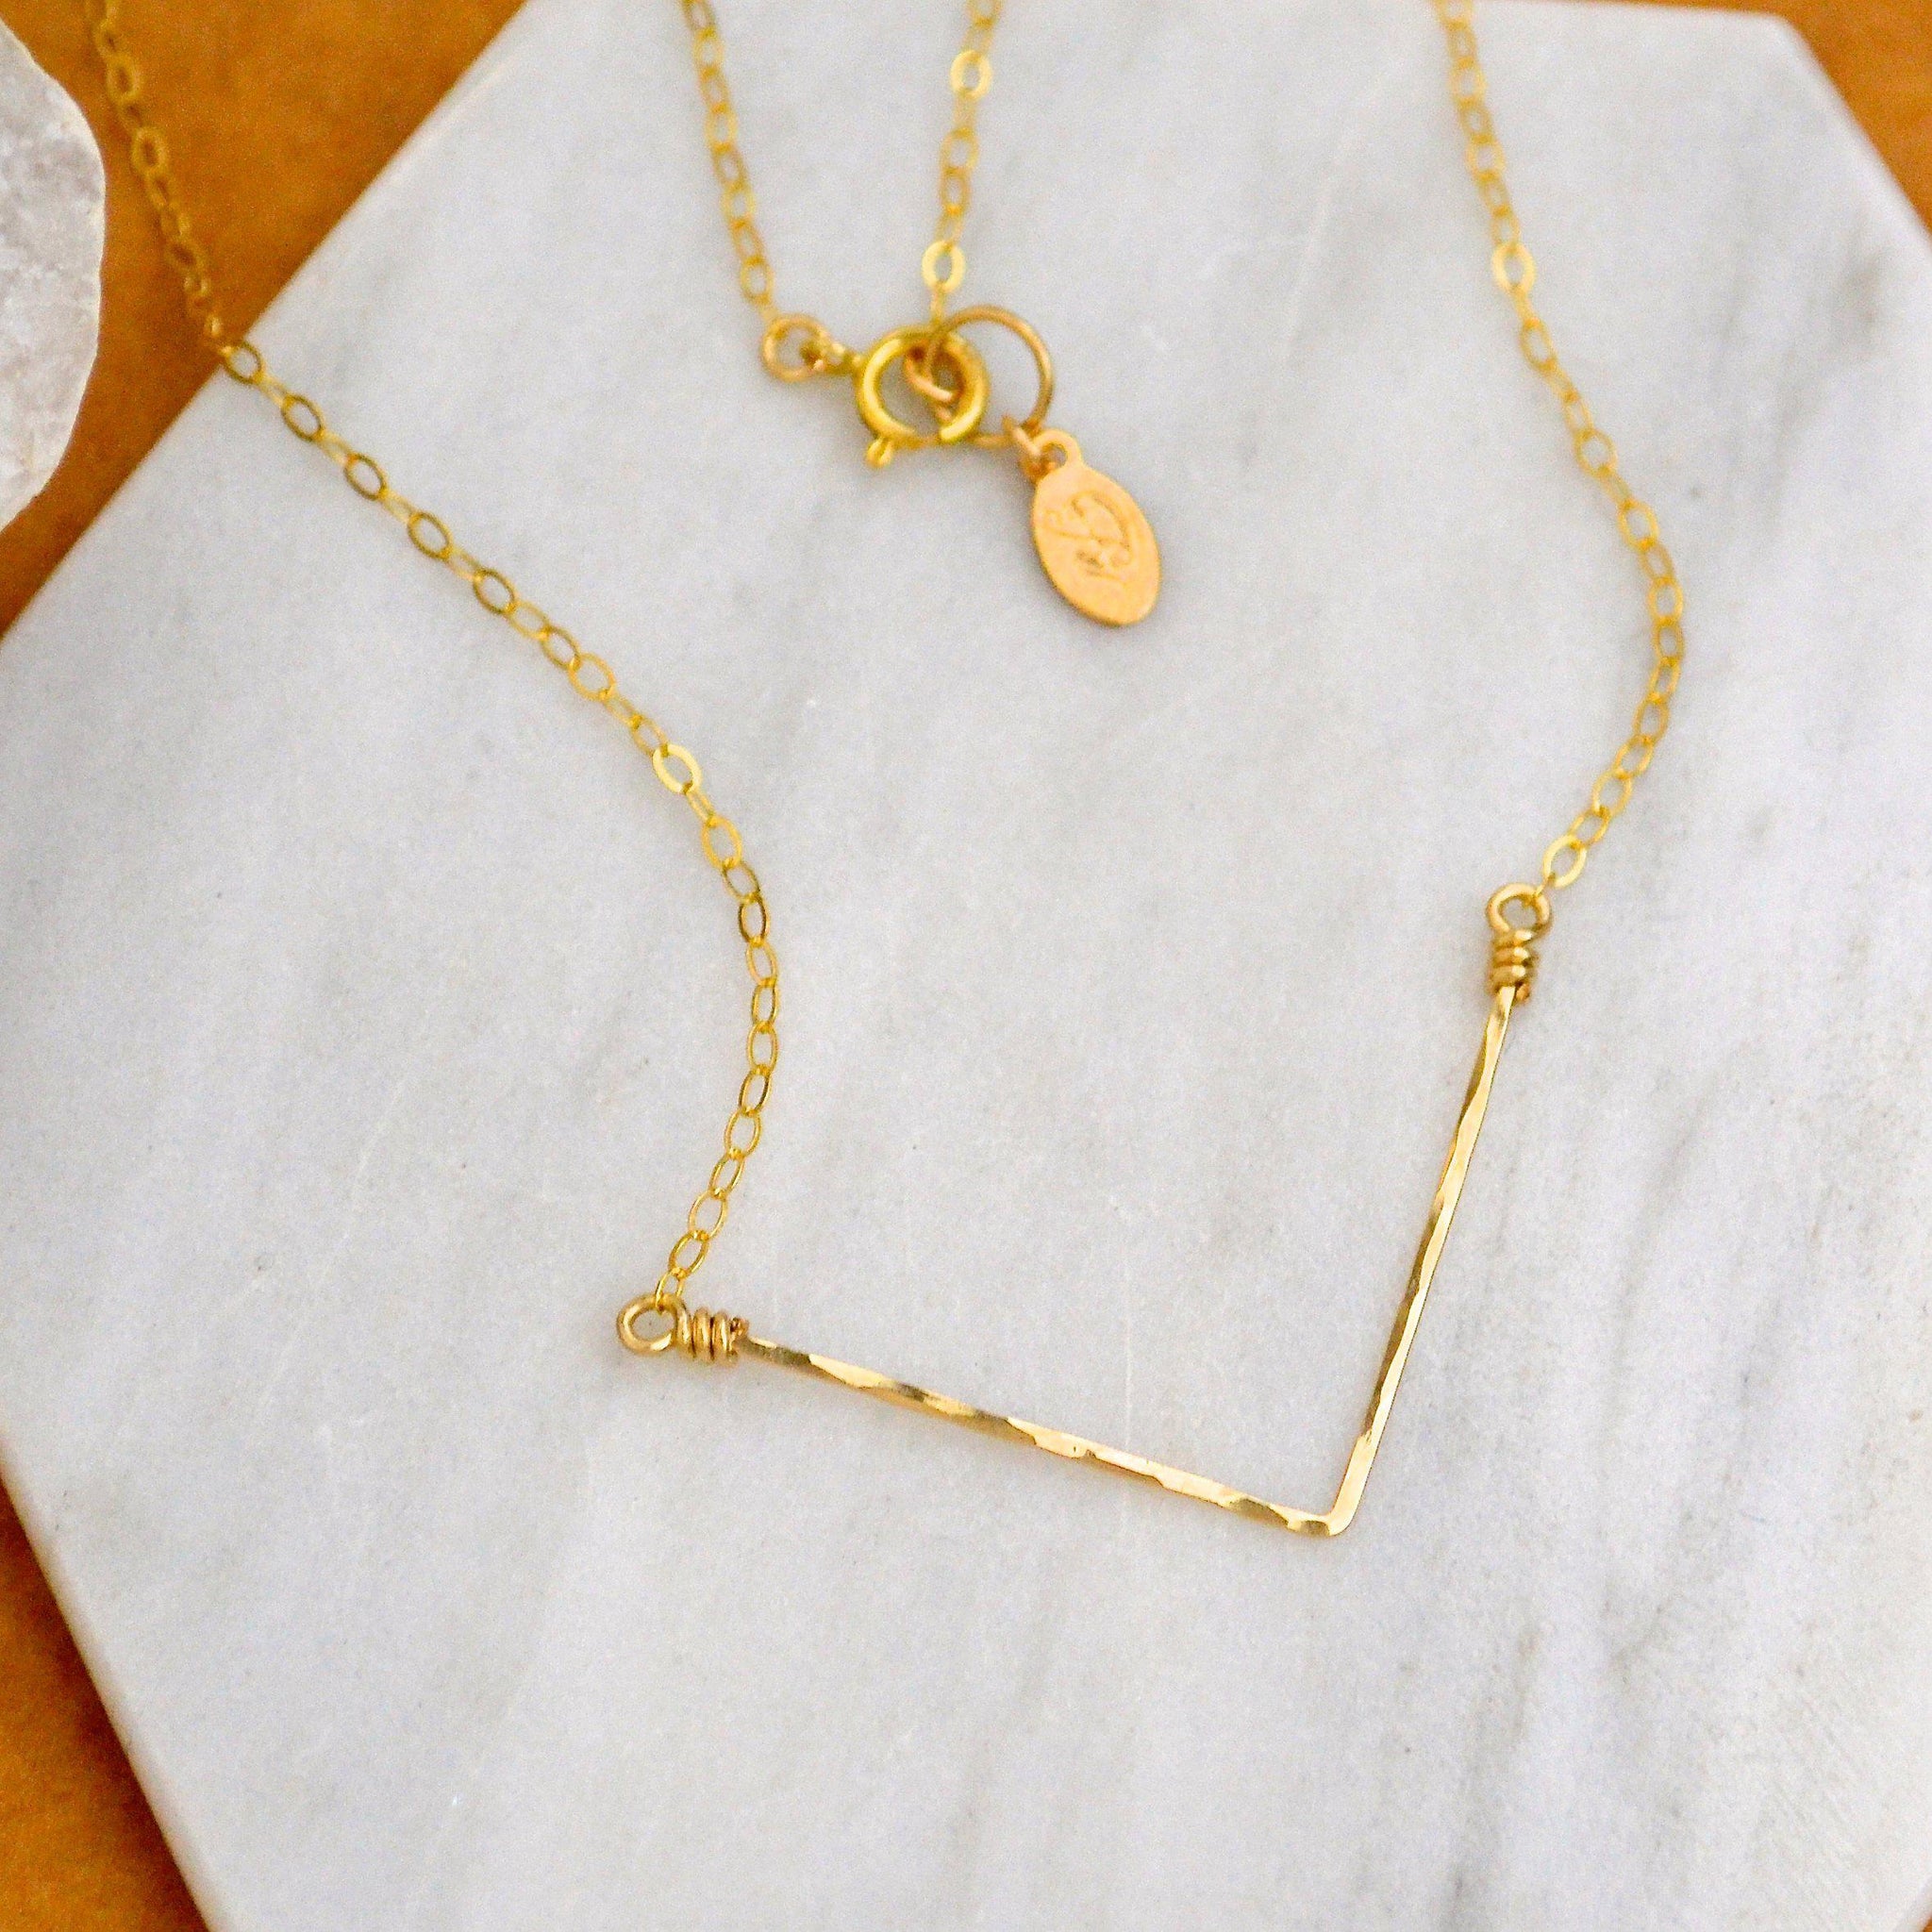 Chevron Diamond Necklace Rose Gold V Shaped Layering Drop Pendant 14K Yellow Gold - Made to Order